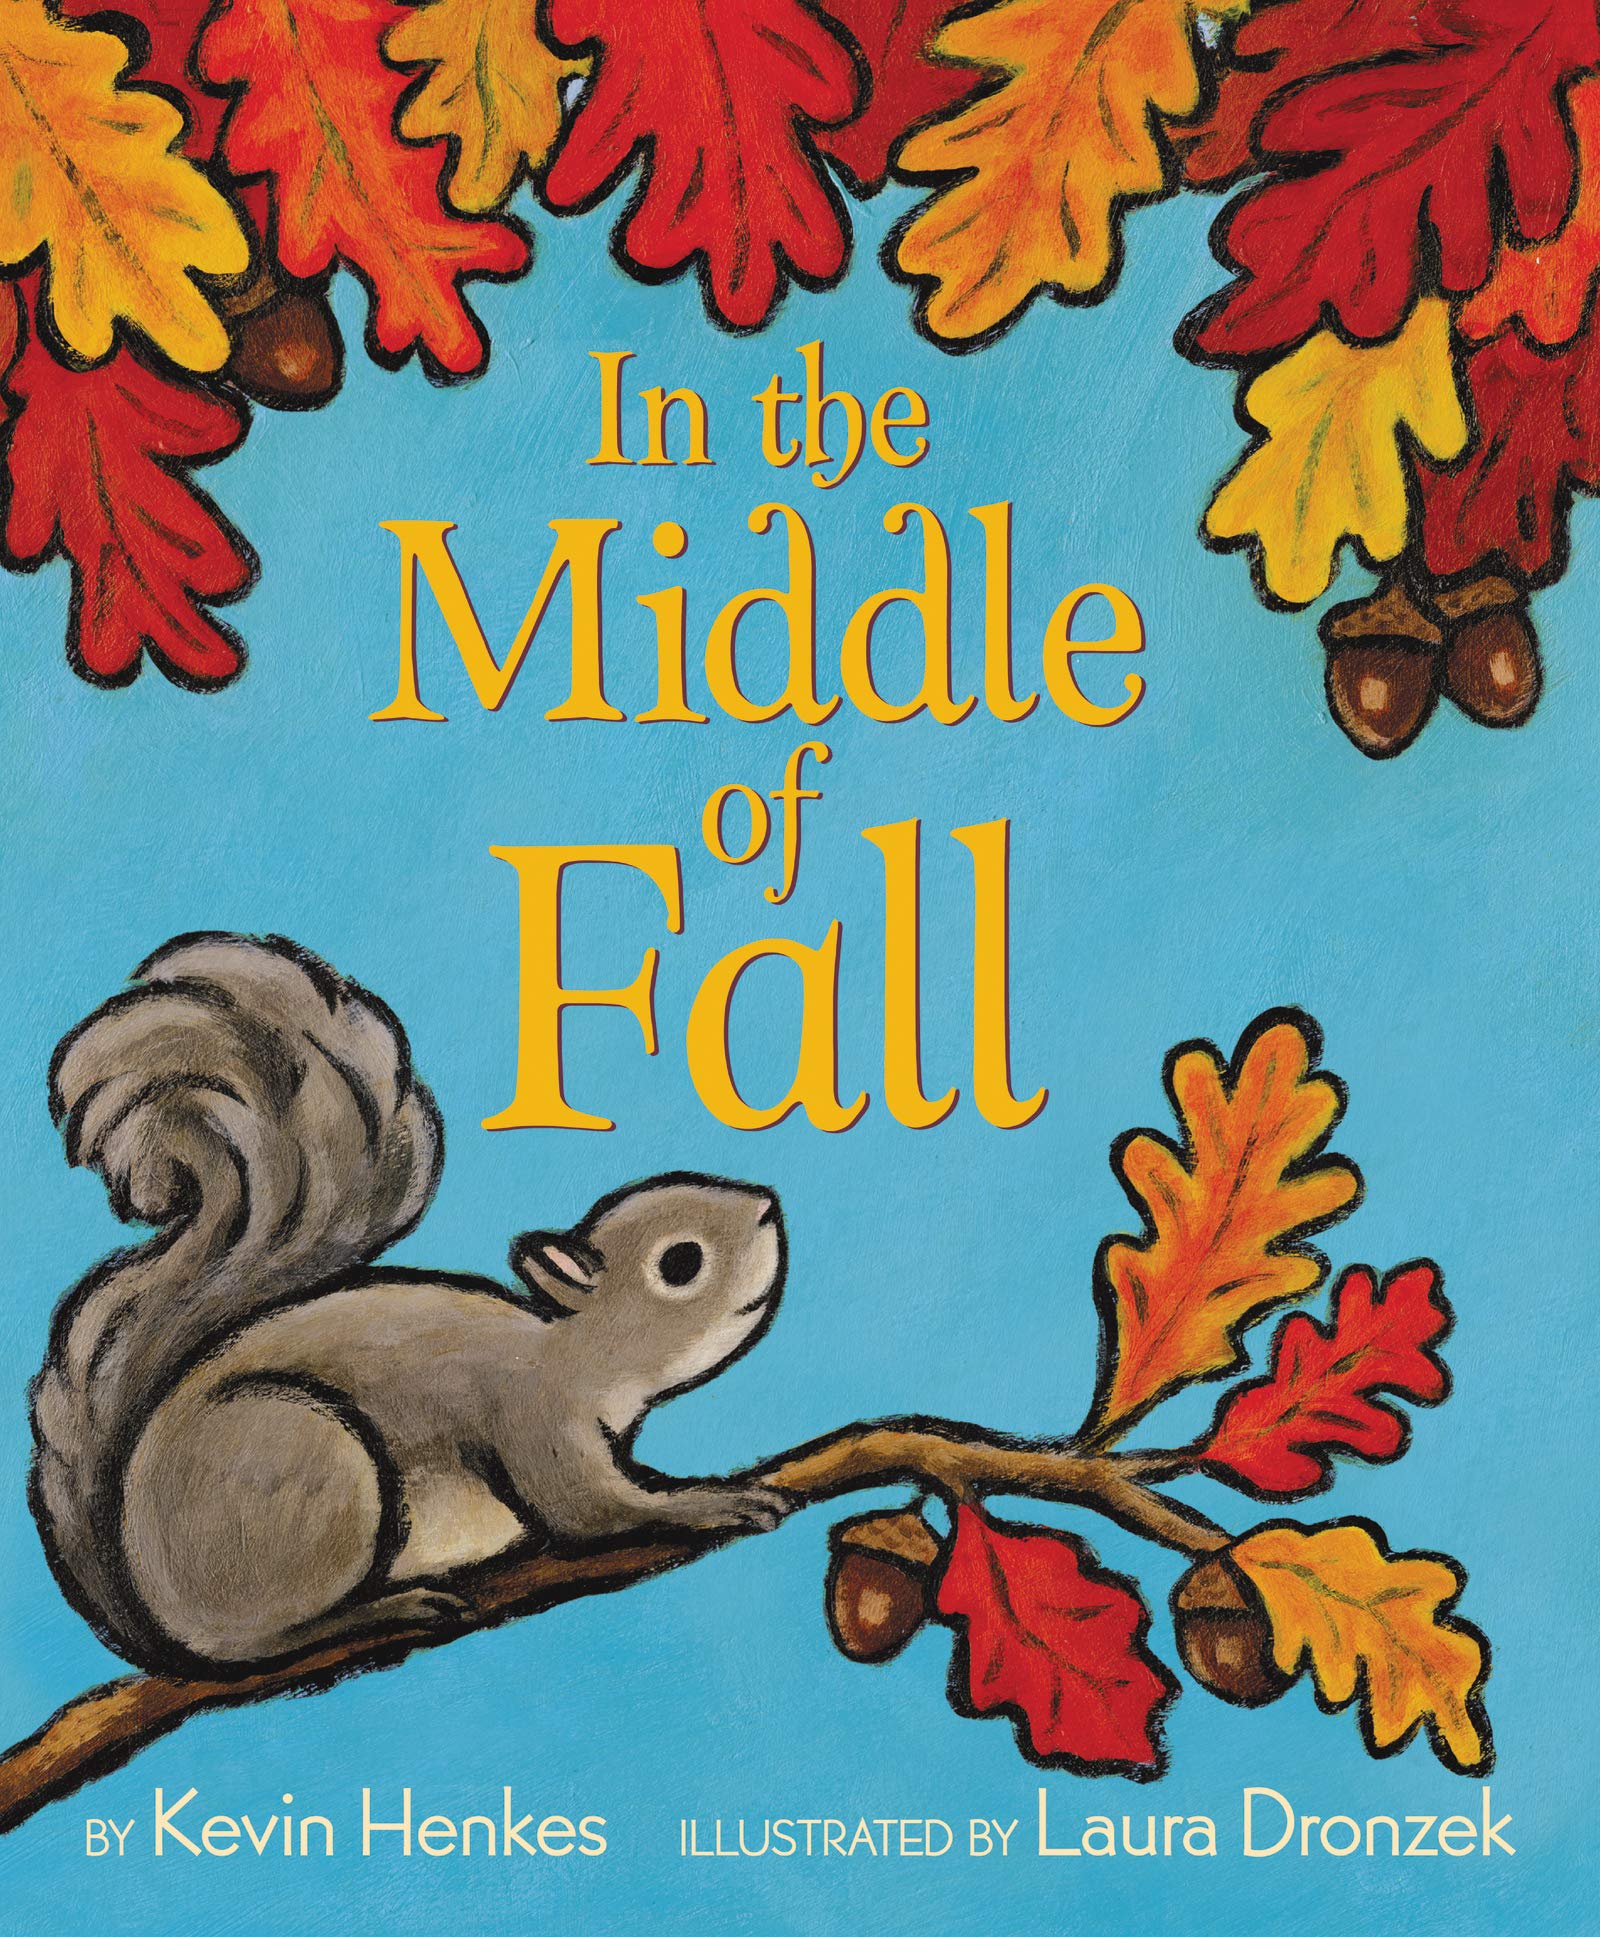 speech and language teaching concepts for In the Middle of the Fall in speech therapy​ ​